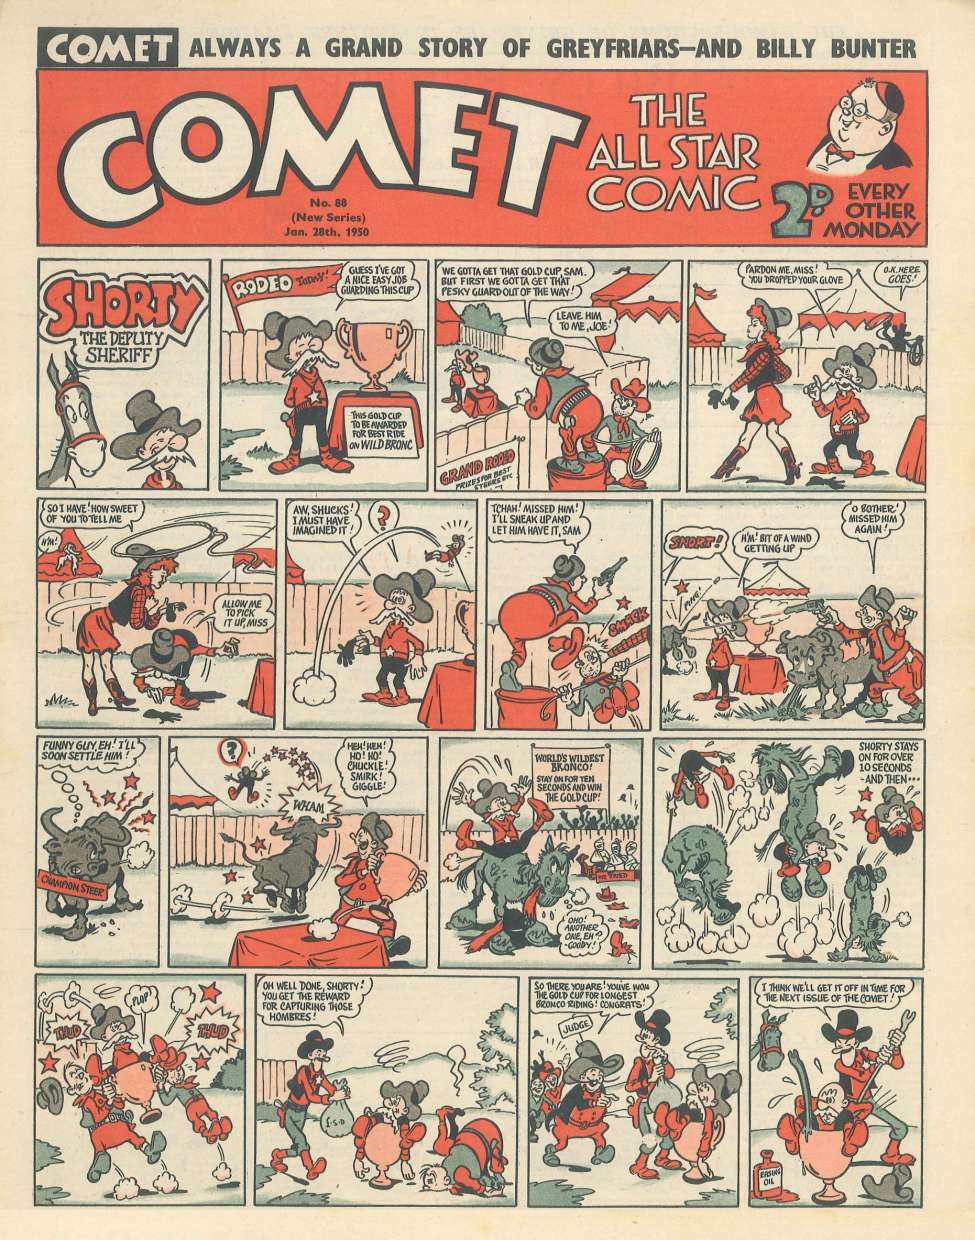 Book Cover For The Comet 88